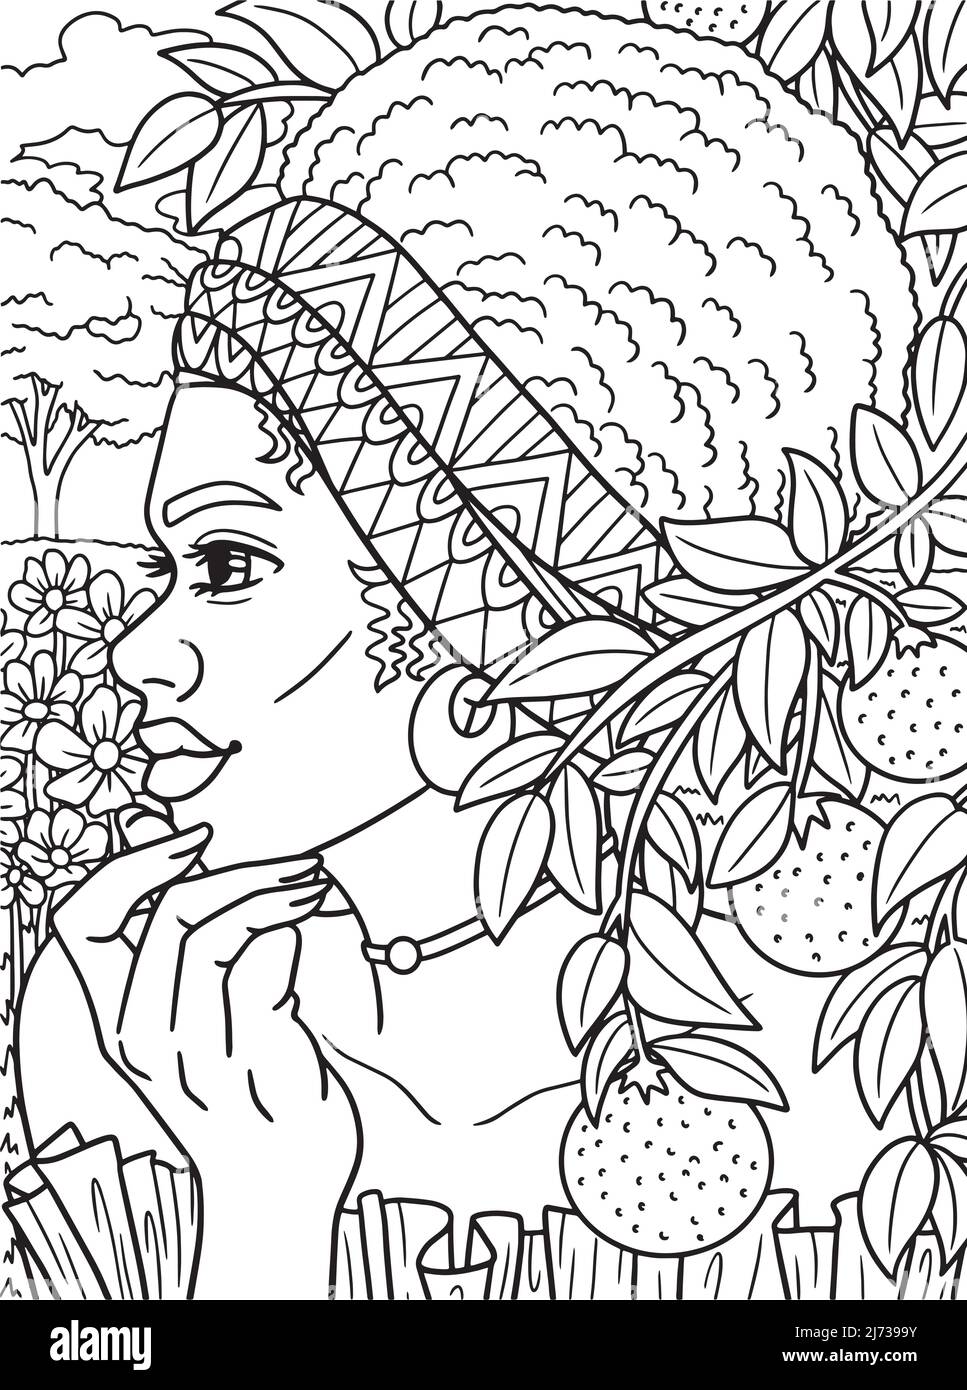 Afro American Woman With Fruit Adult Coloring  Stock Vector